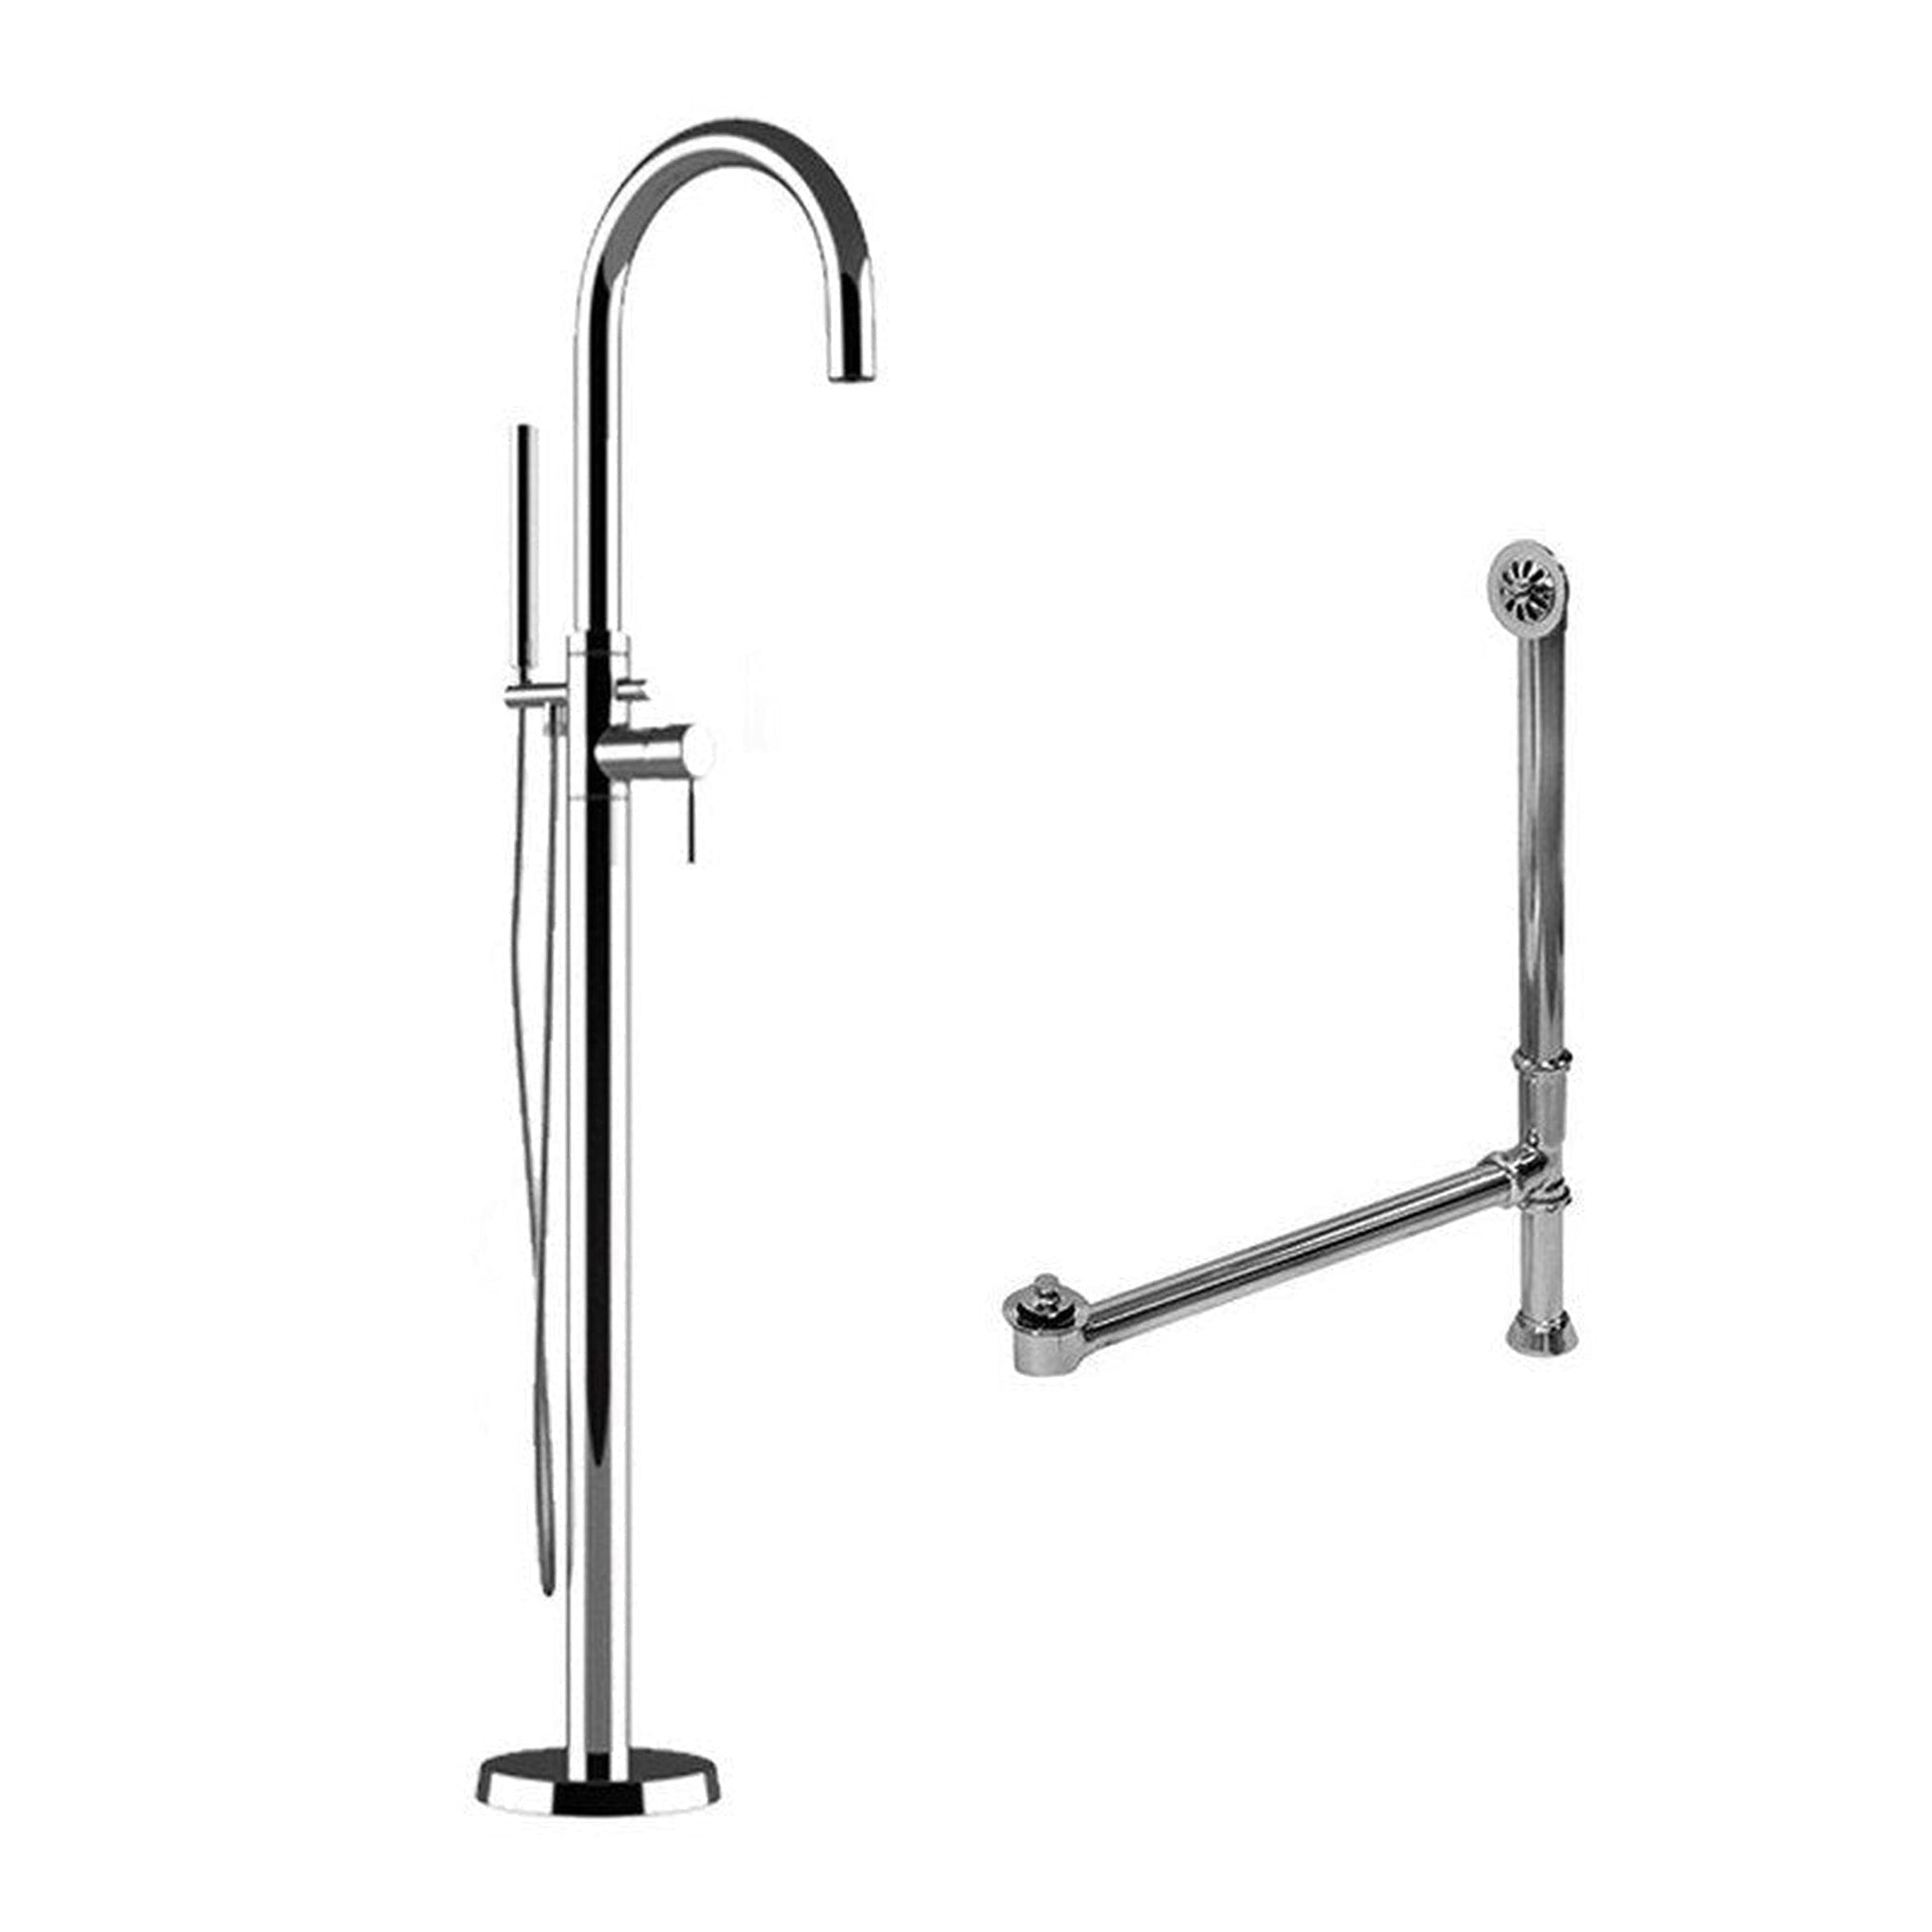 Cambridge Plumbing Complete Plumbing Package In Polished Chrome Including Free Standing Modern Gooseneck Style Faucet With Hand Held Wand Shower, Supply Lines, Drain And Overflow Assembly